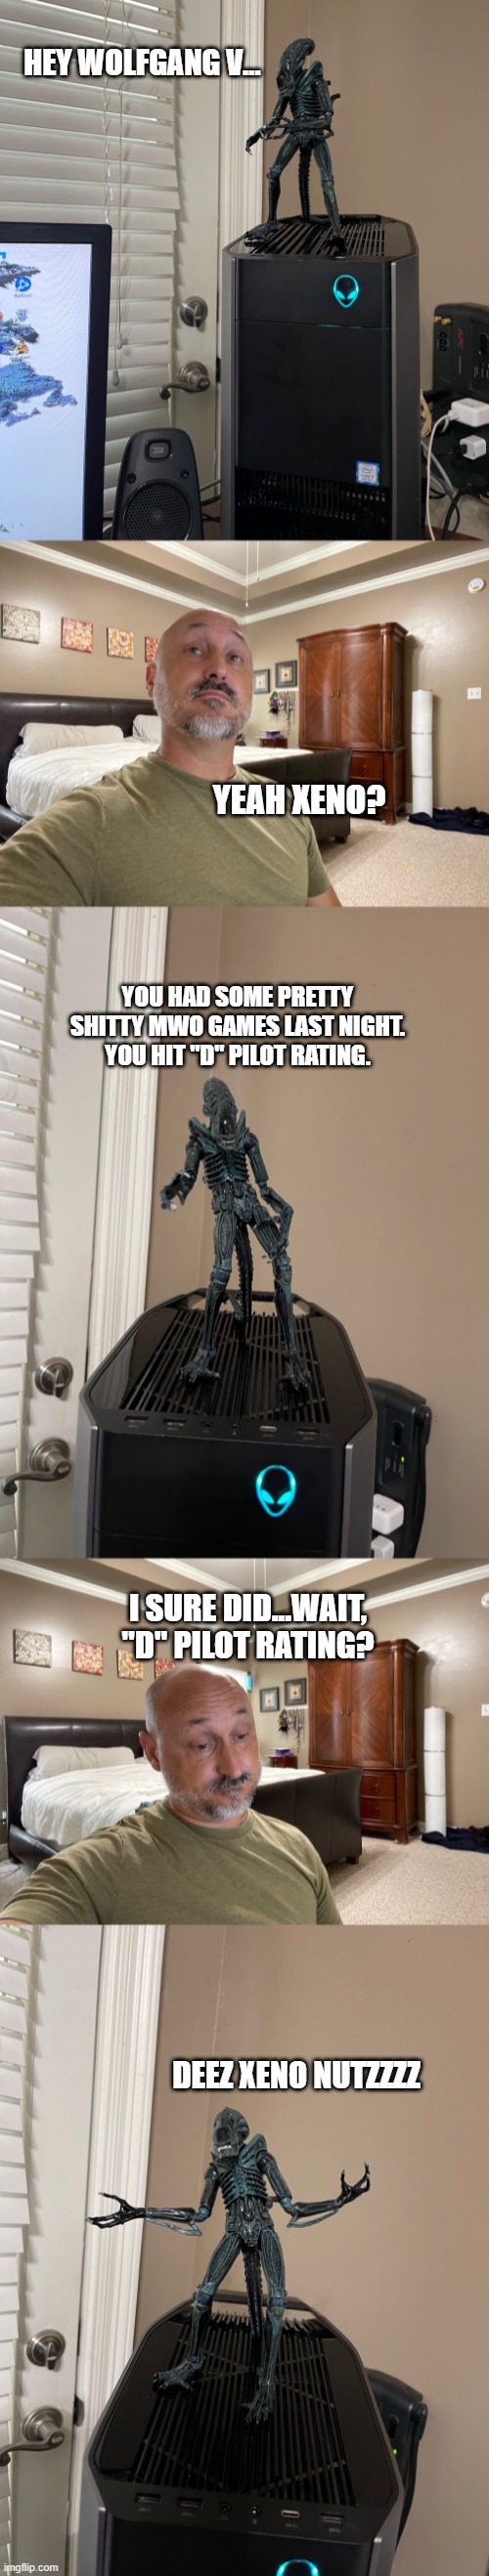 Bad Xeno | HEY WOLFGANG V... YEAH XENO? YOU HAD SOME PRETTY SHITTY MWO GAMES LAST NIGHT. YOU HIT "D" PILOT RATING. I SURE DID...WAIT, "D" PILOT RATING? DEEZ XENO NUTZZZZ | image tagged in xenomorph,mechwarrior online,pc gaming | made w/ Imgflip meme maker